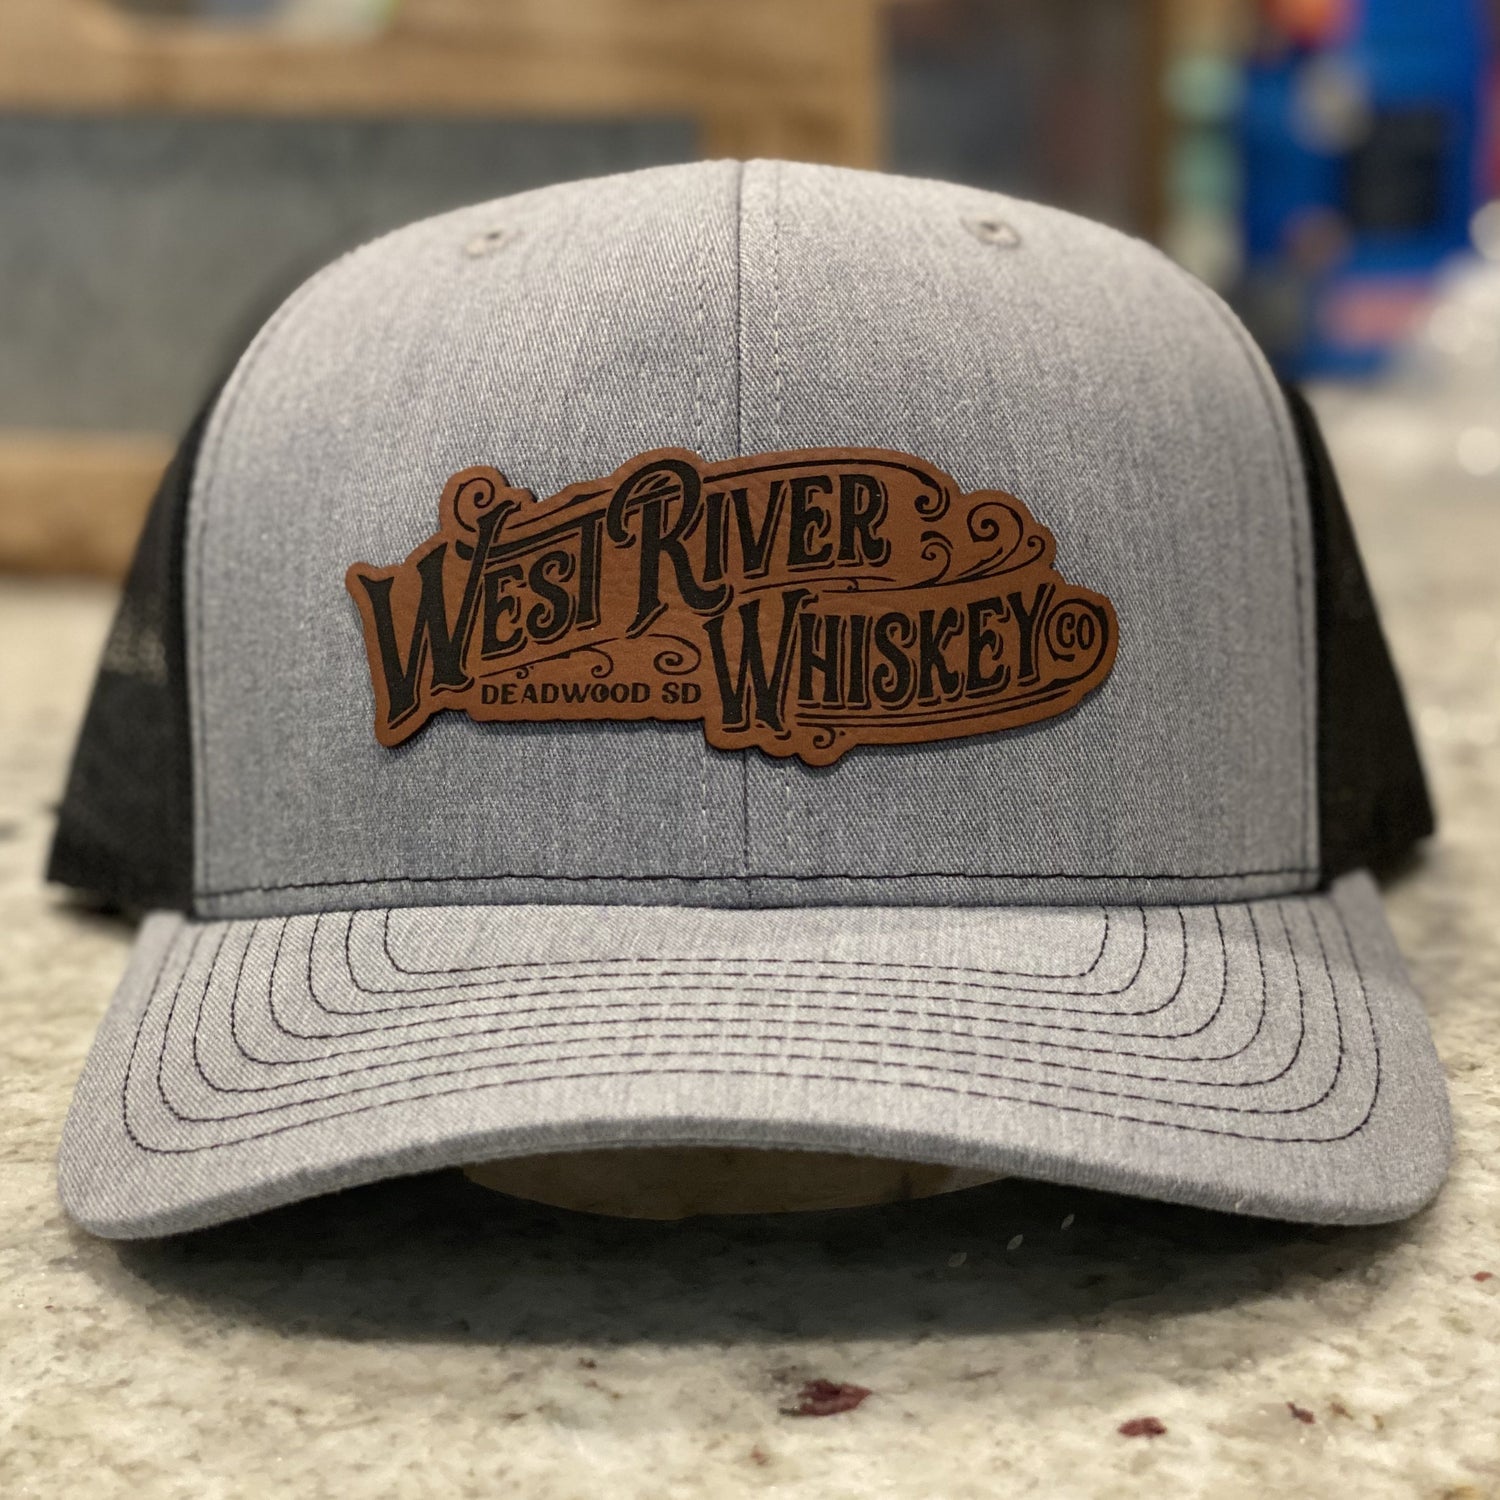 west river whiskey co branded